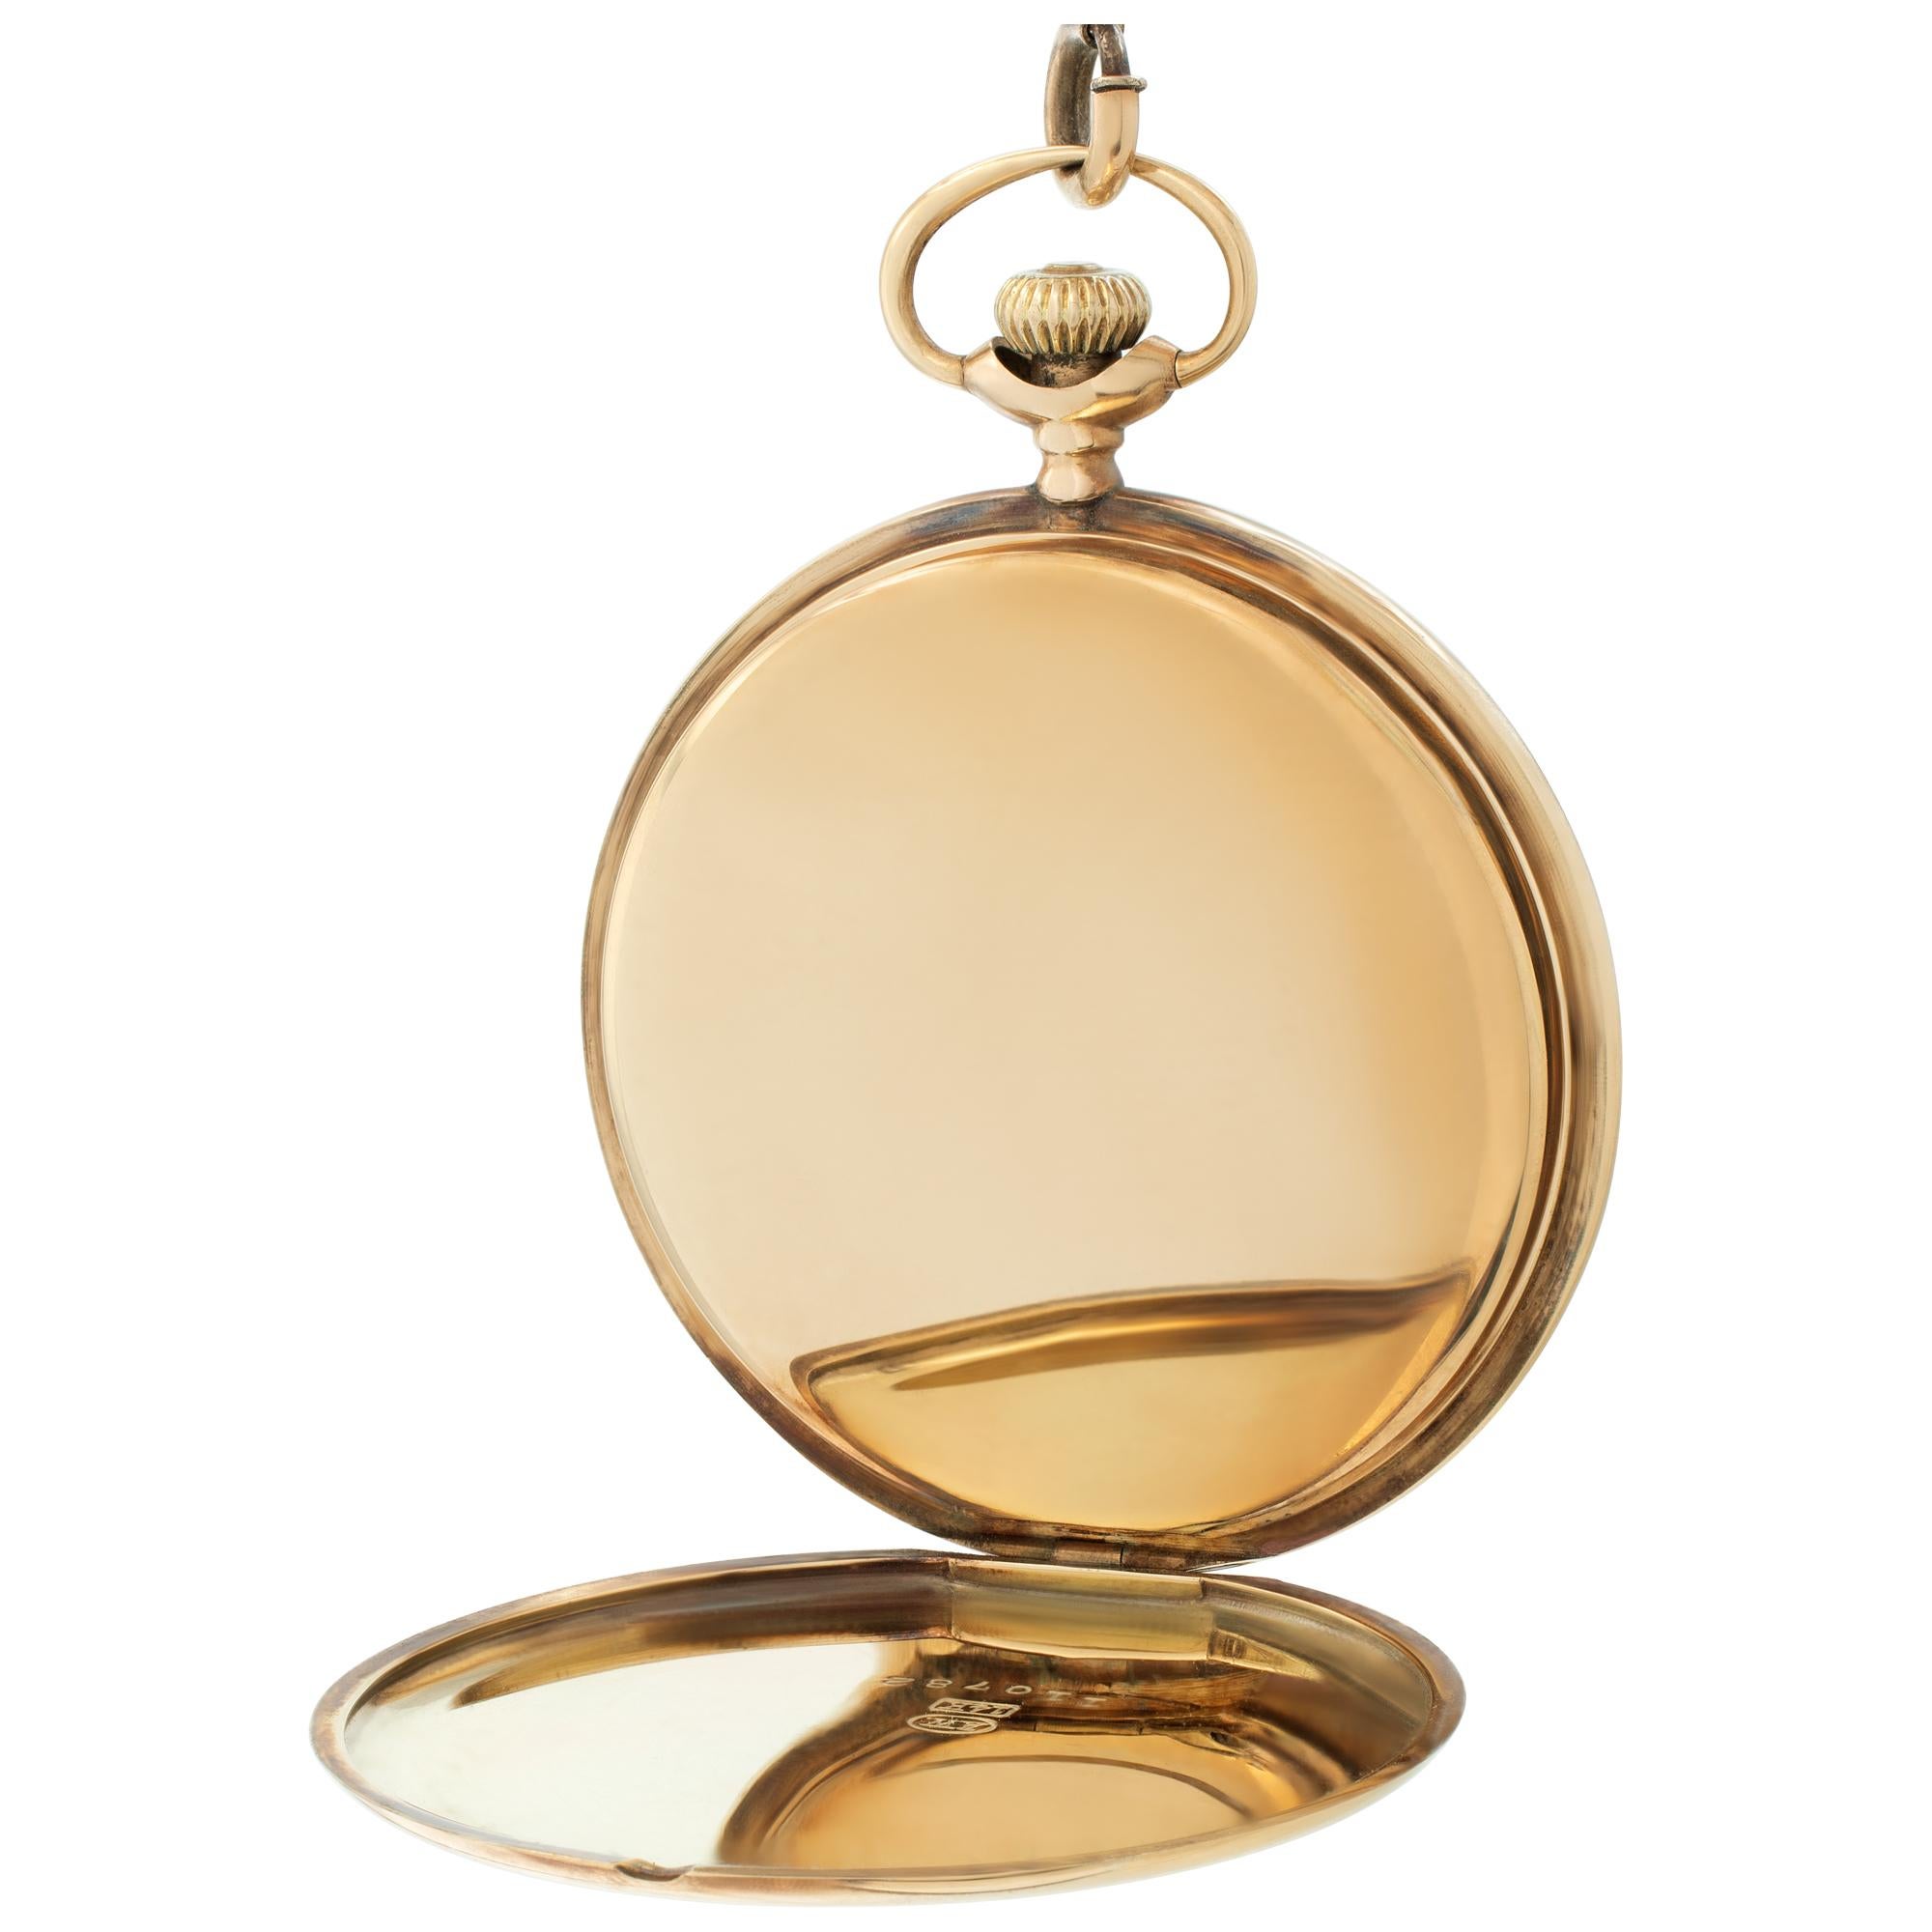 Longines pocket watch in 14k yellow gold with a gold plated chain. Manual wind 17 jewel movent. Arabic numerals. 43 mm case size. Fine Pre-owned Longines Watch. Certified preowned Vintage Longines pocket watch watch is made out of yellow gold. This